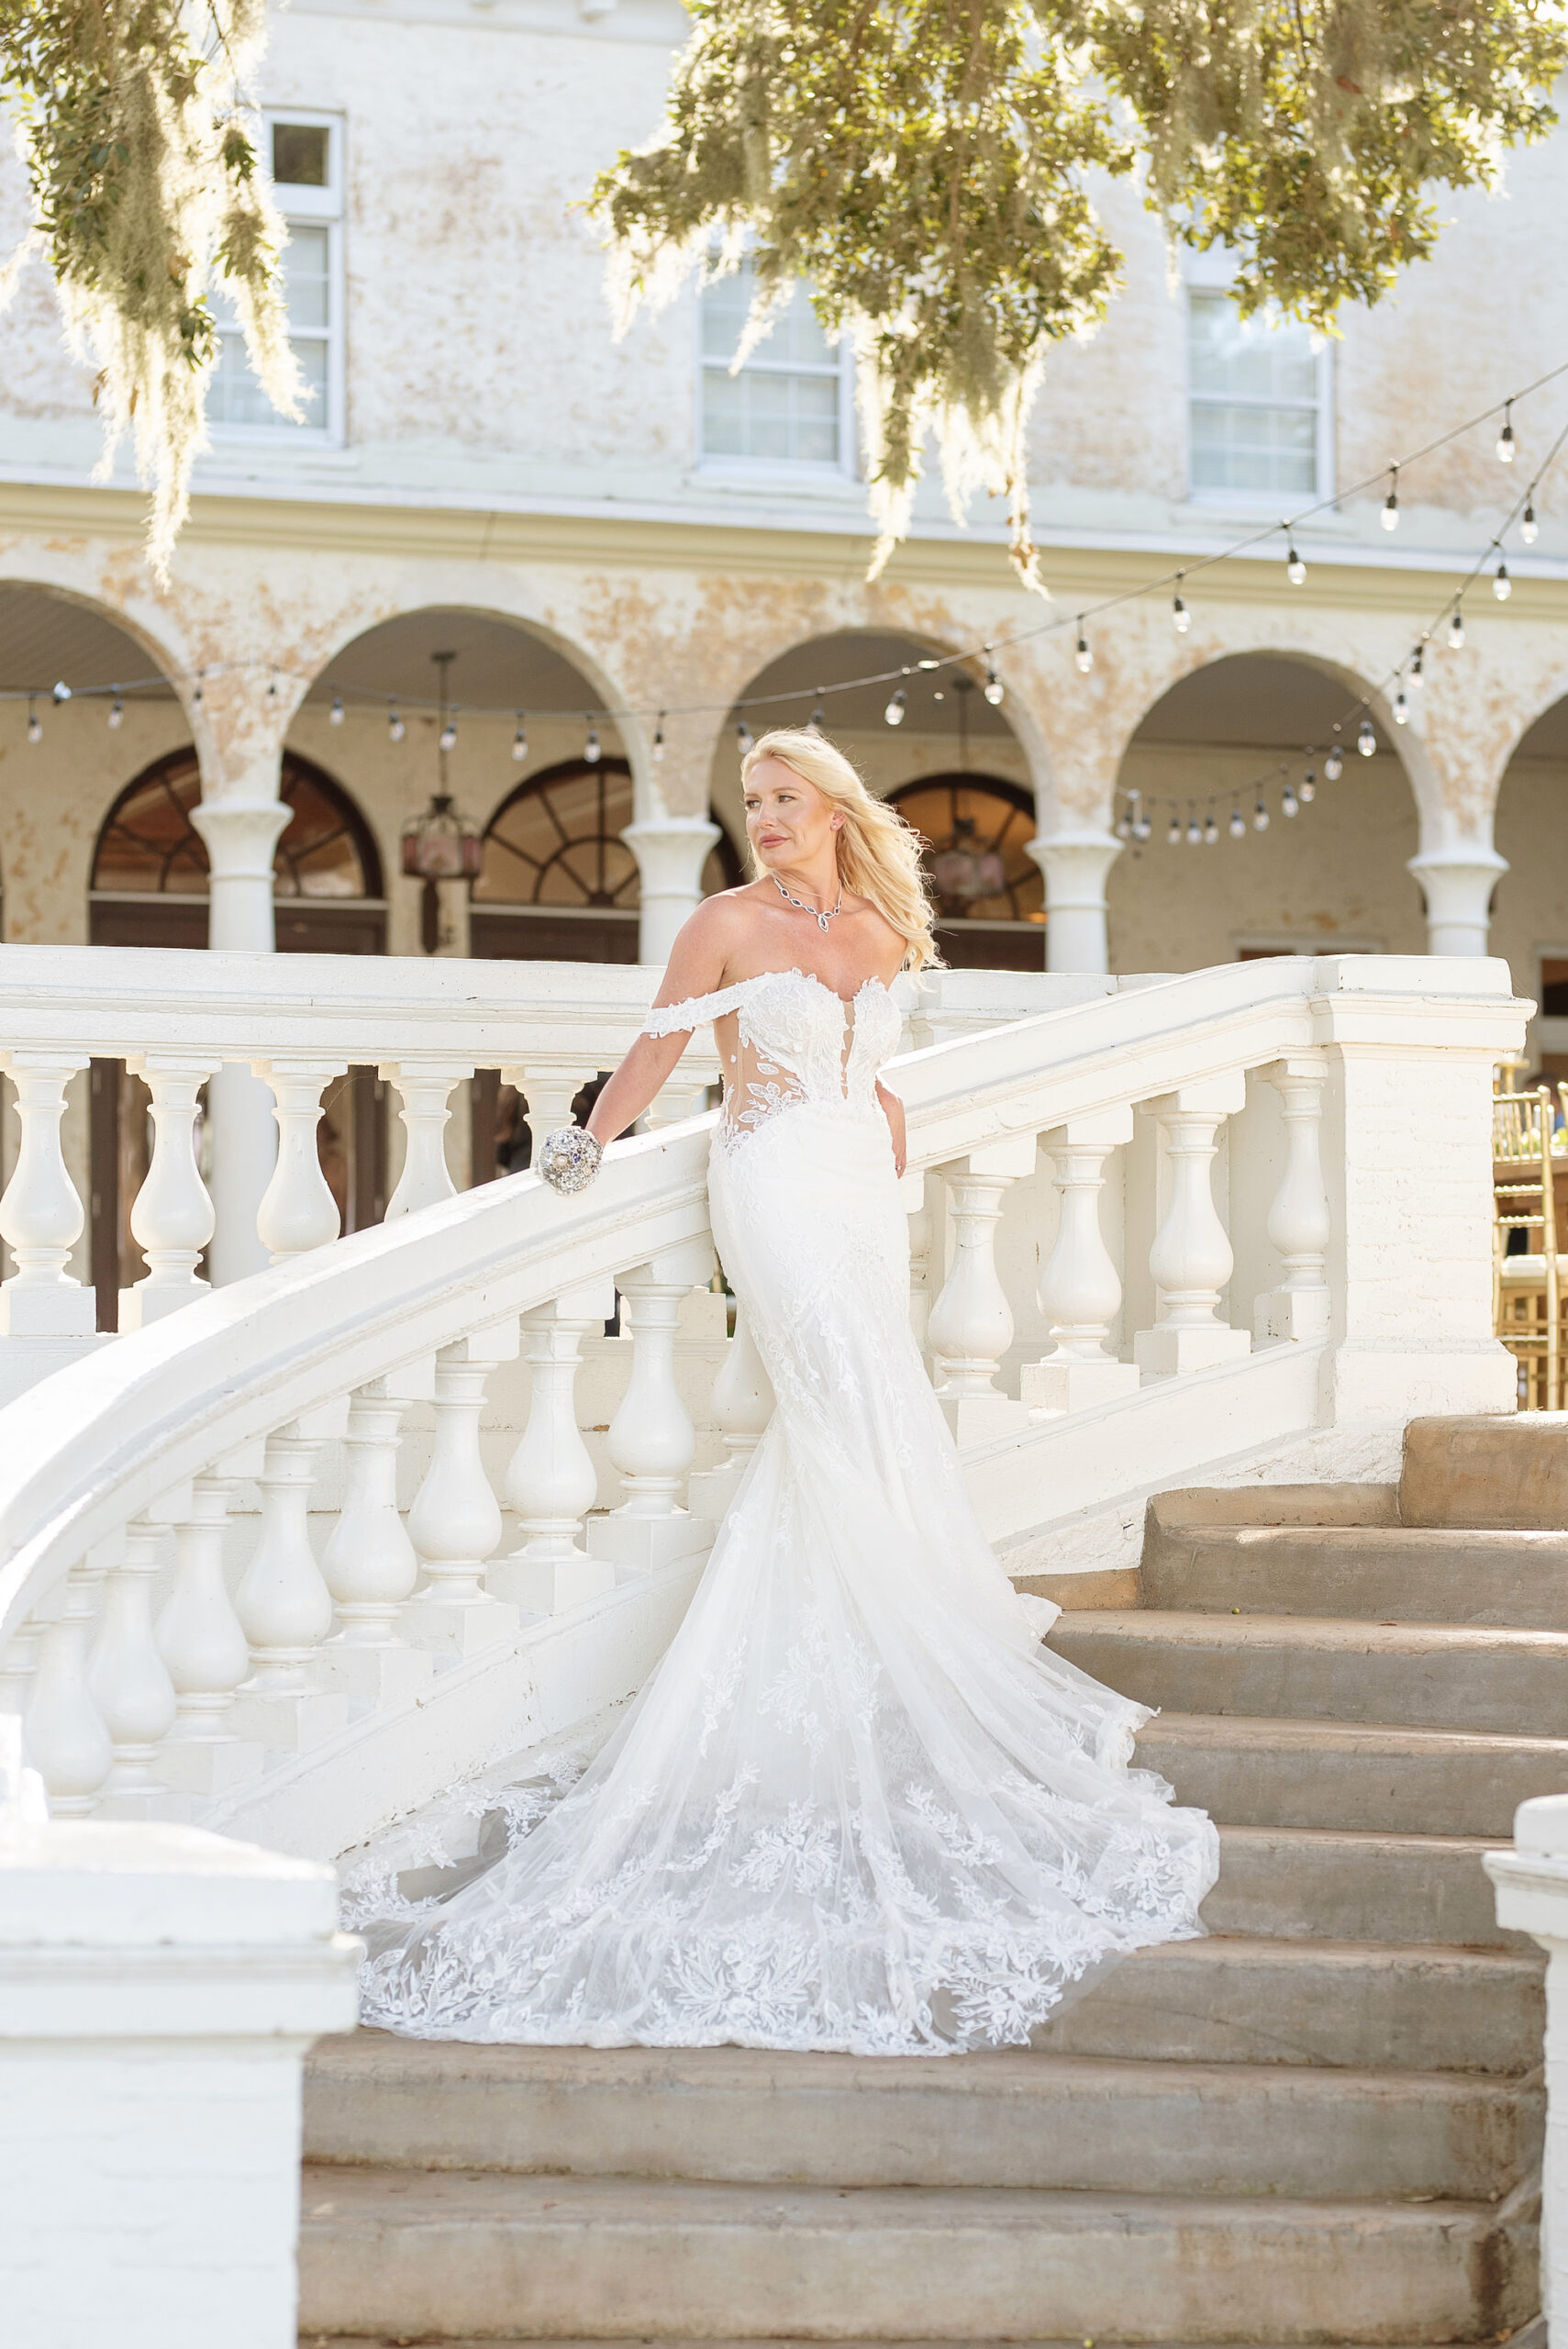 Outdoor Bridal Wedding Portrait on Stairs | Venue Bella Cosa | Tampa Bay Wedding Photographer Kristen Marie Photography |